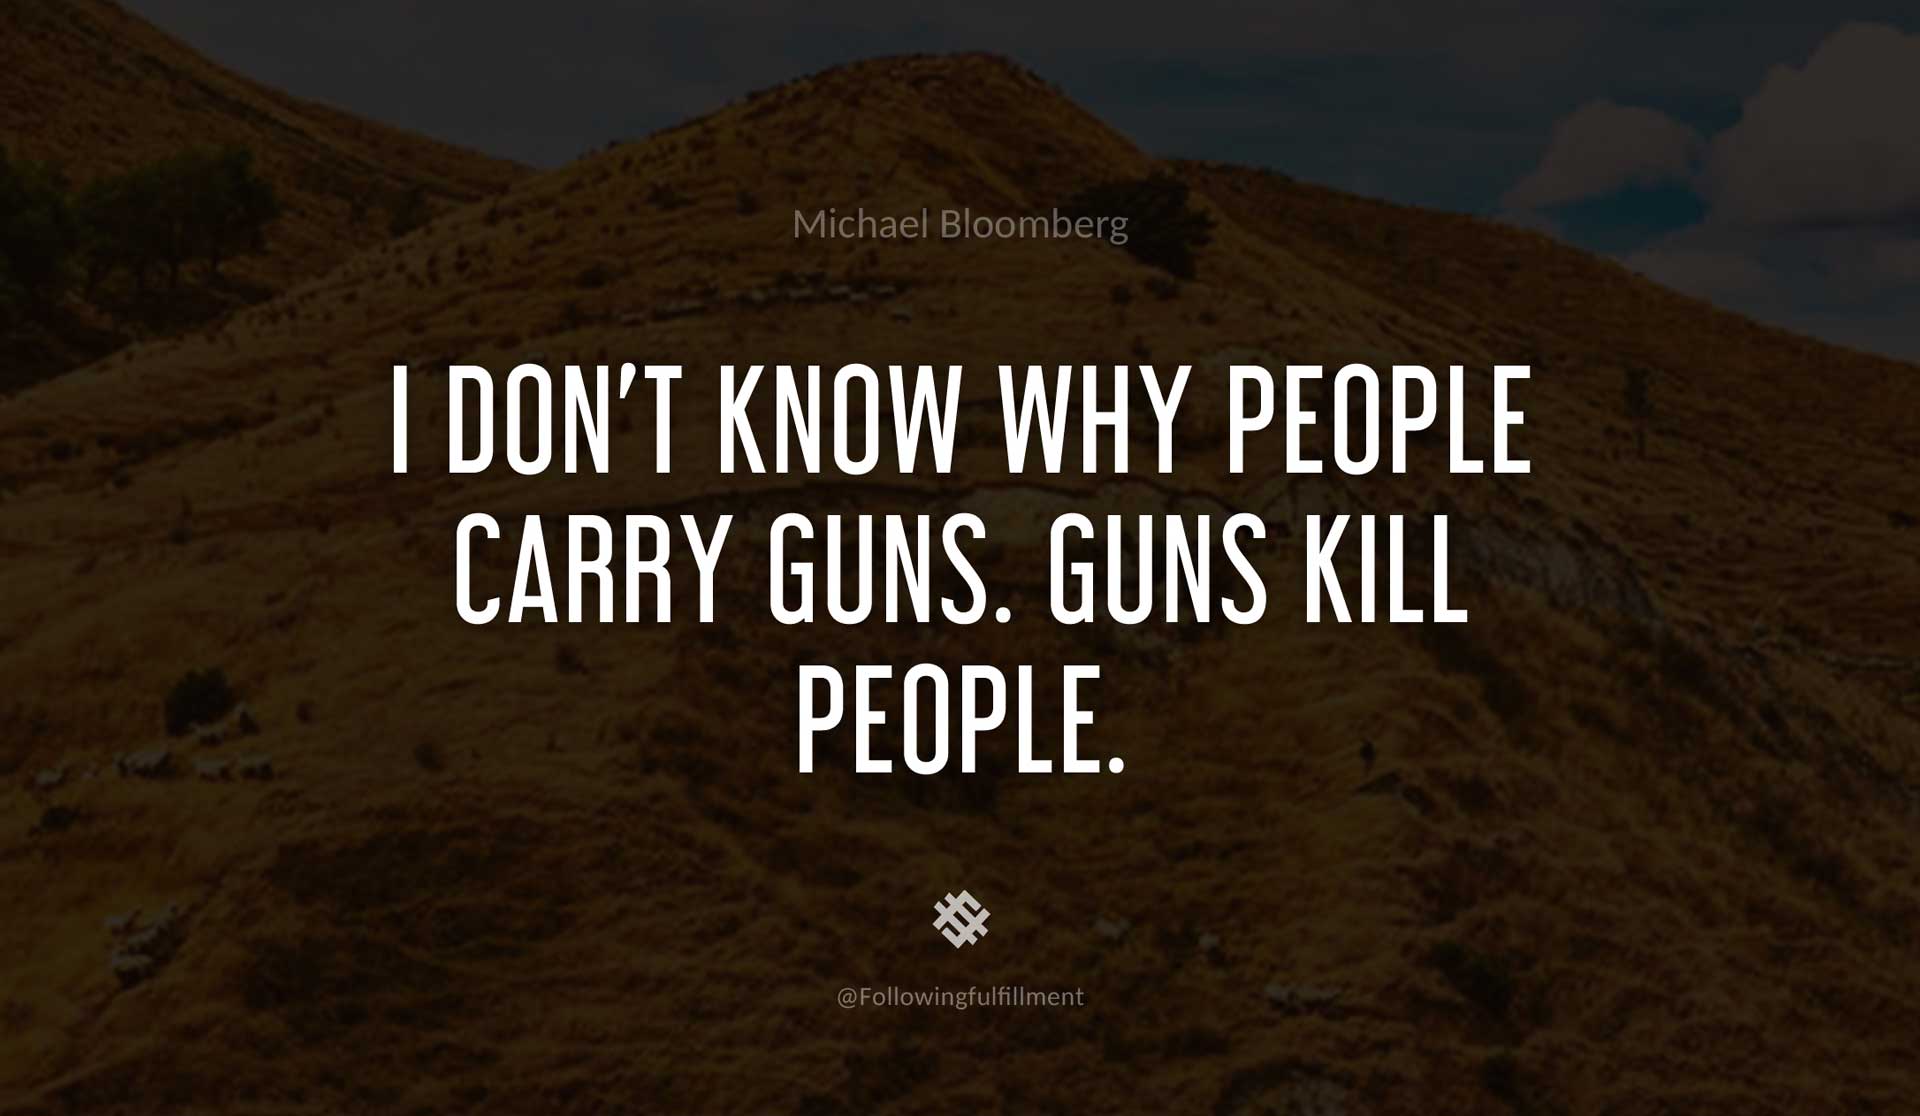 I-don't-know-why-people-carry-guns.-Guns-kill-people.-MICHAEL-BLOOMBERG-Quote.jpg